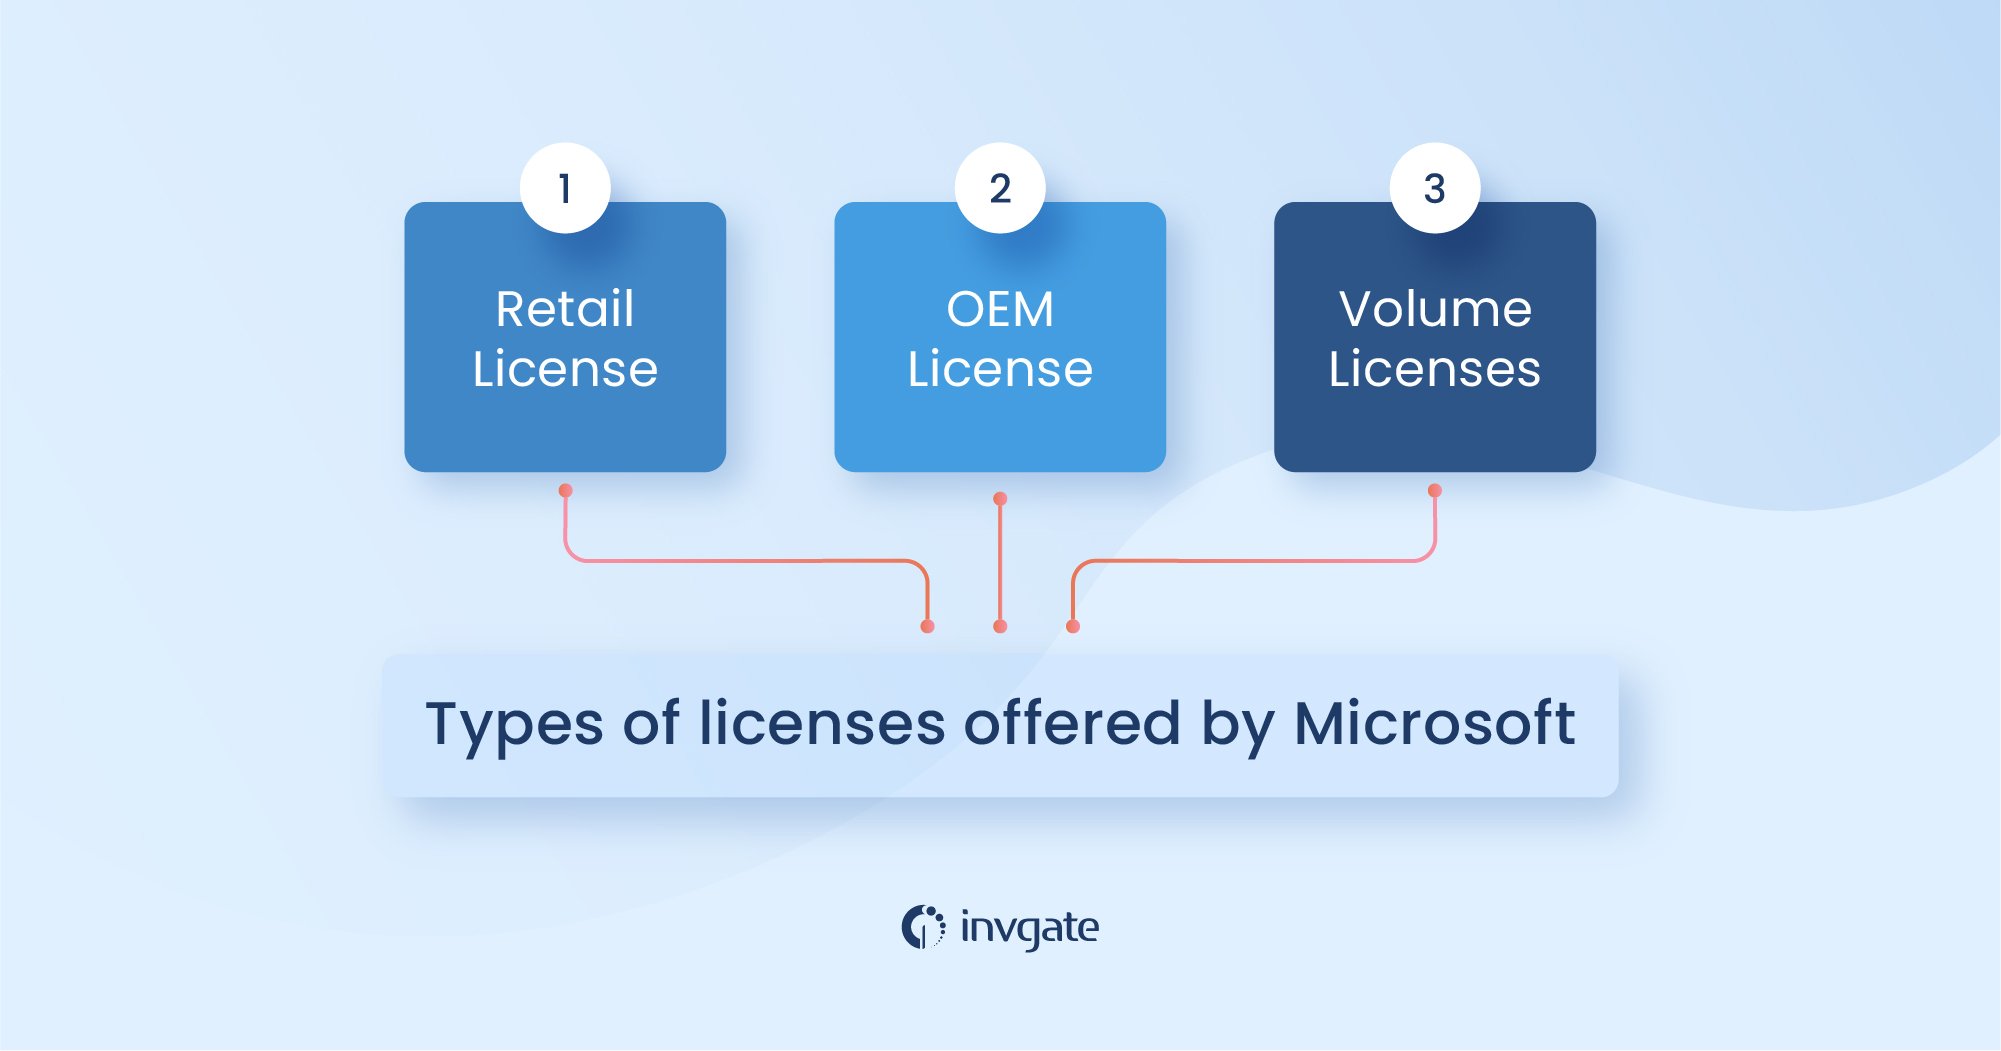 In recent times, as mobile apps and enterprise SaaS solutions have become mainstream, enterprise OEM licensing is commonly used by companies to add more features and functionality to their offerings.